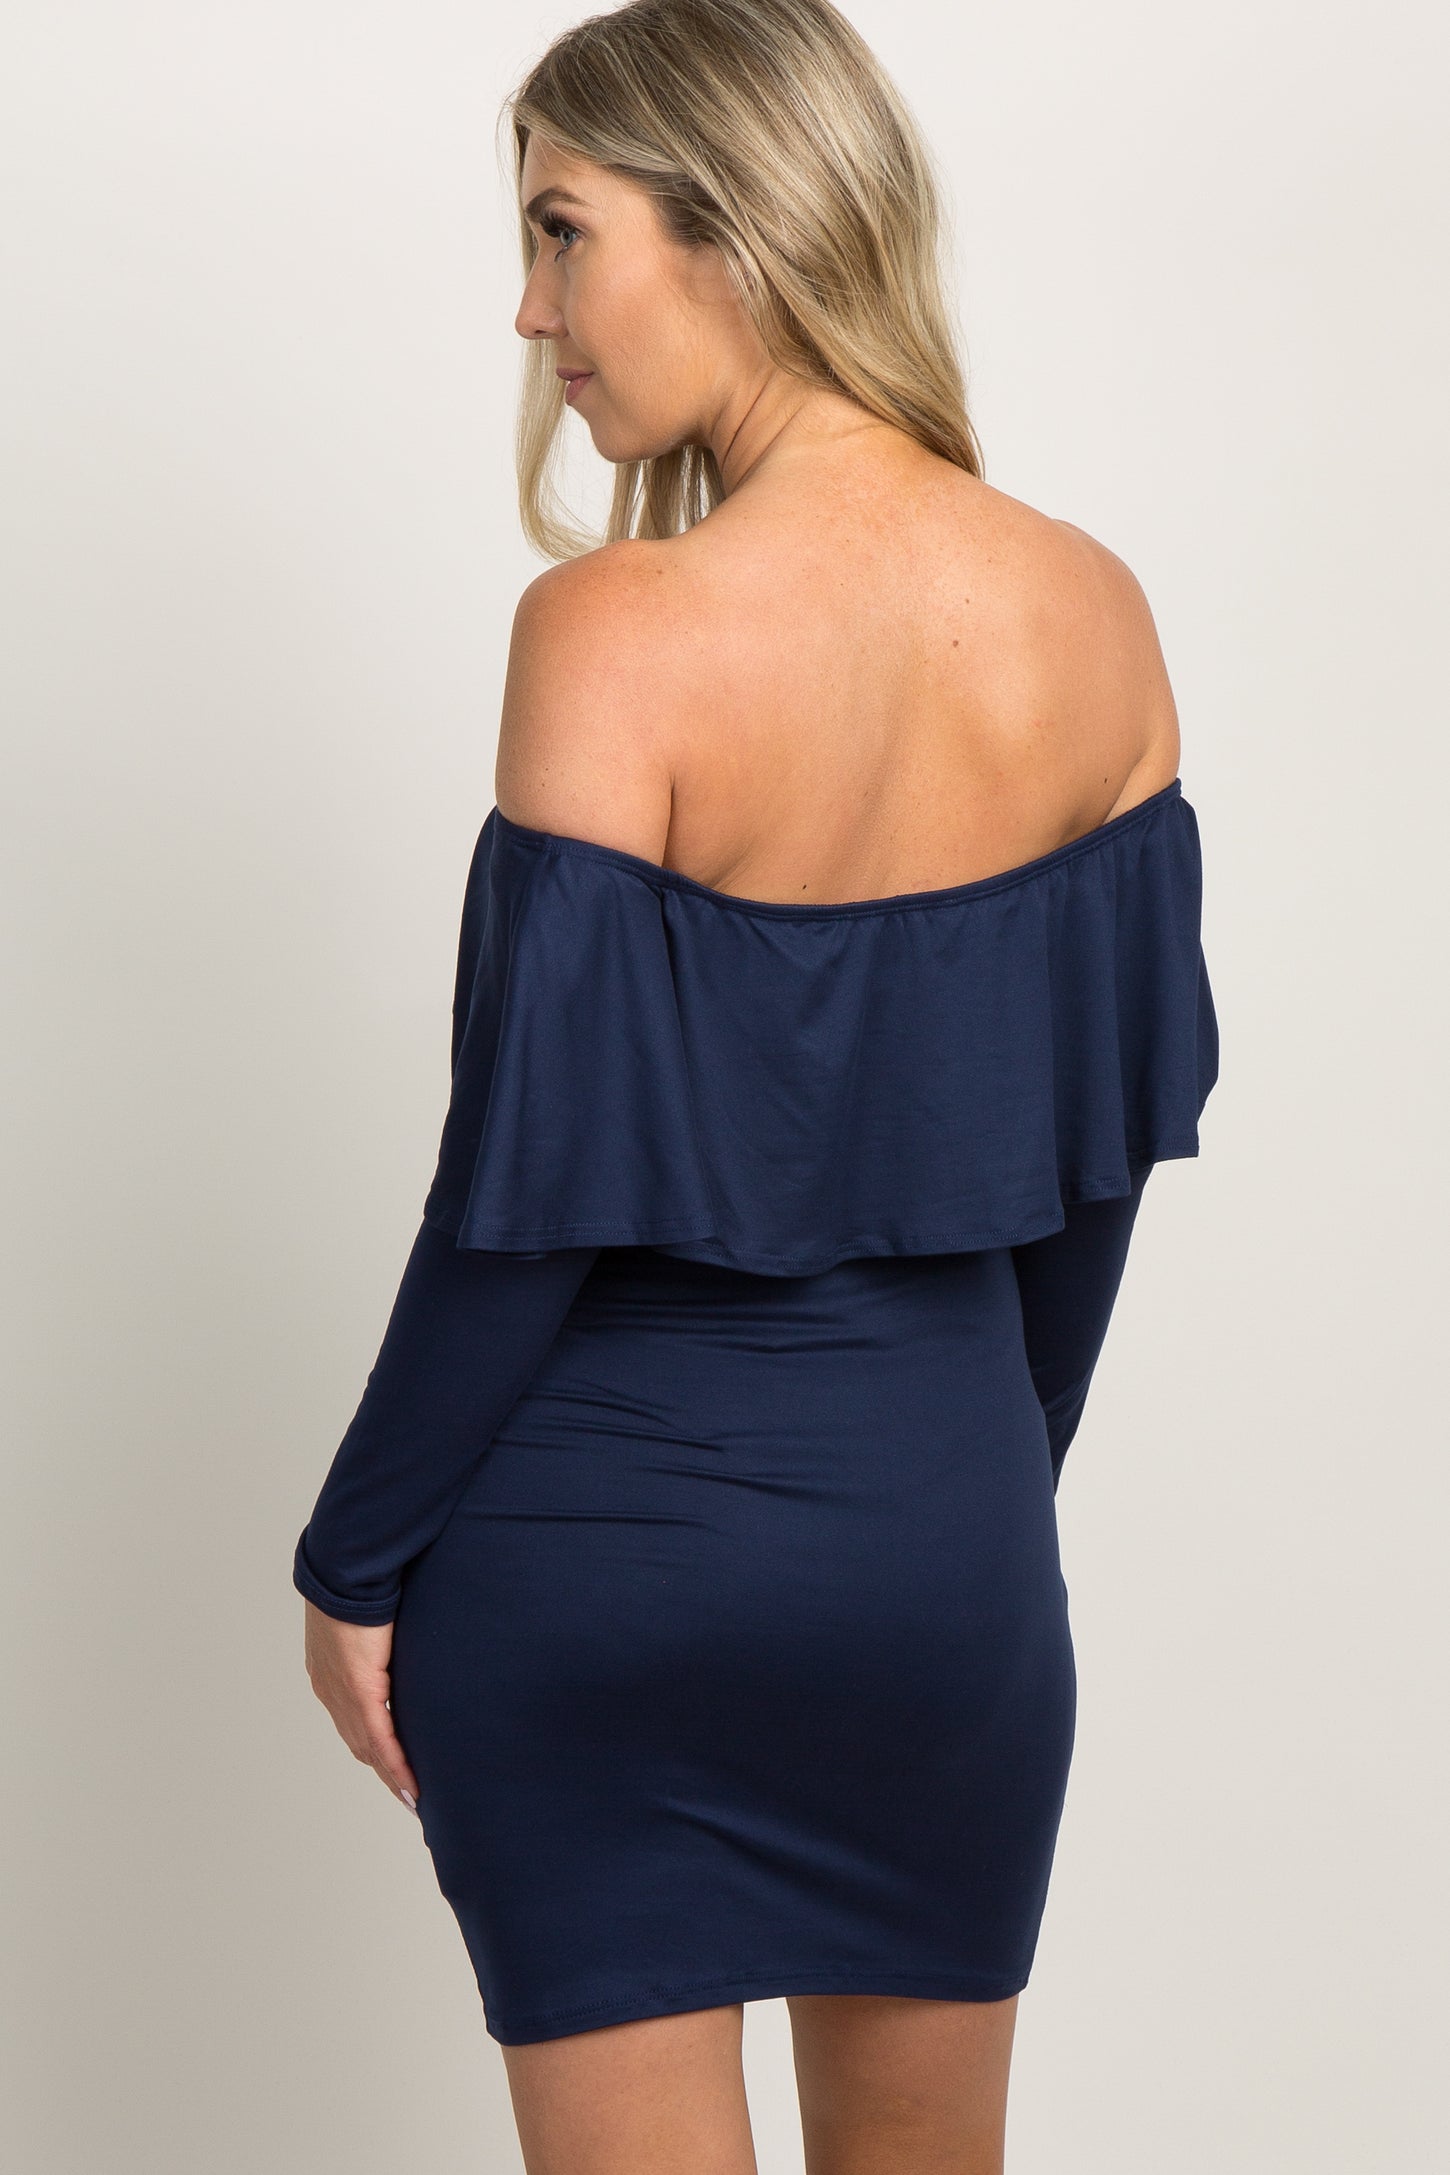 Navy Ruffle Trim Off Shoulder Fitted Maternity Dress